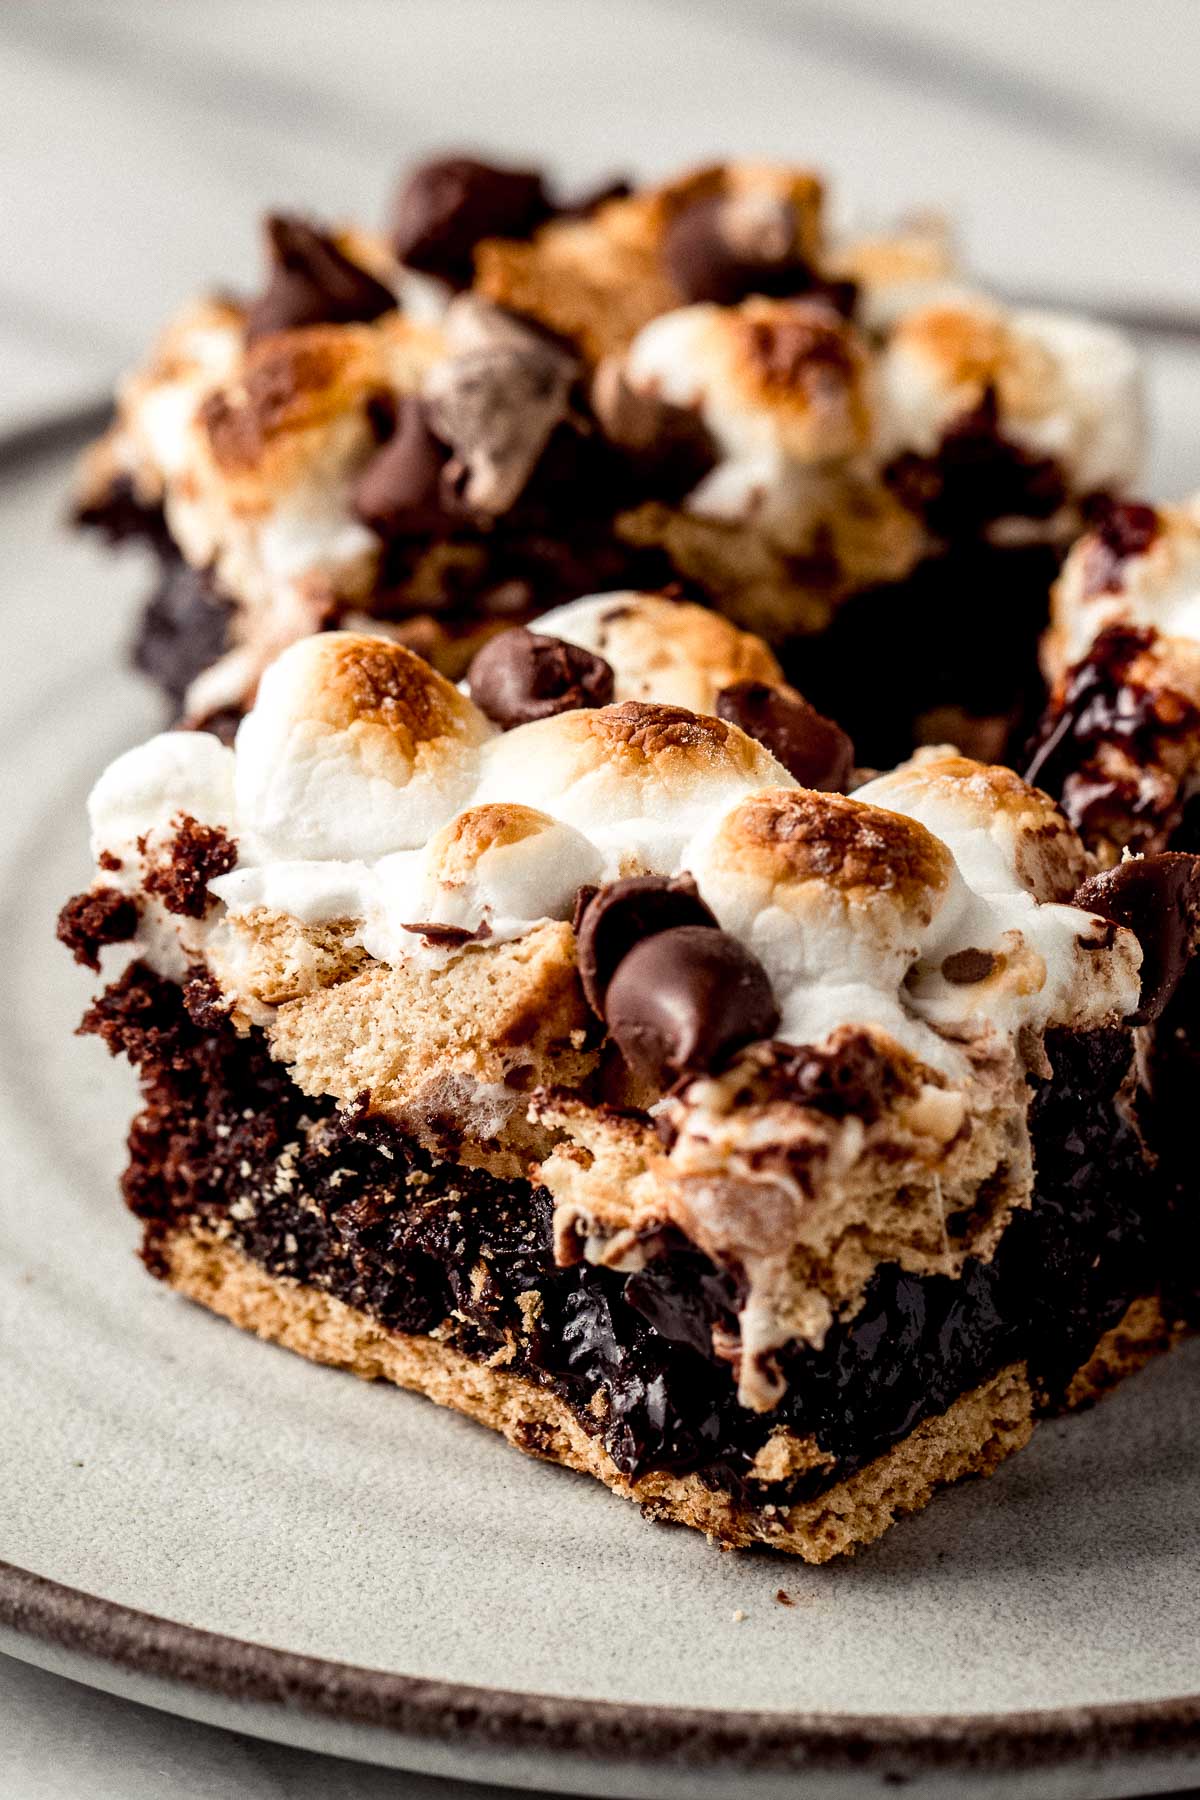 Baked smores browinies on a plate.